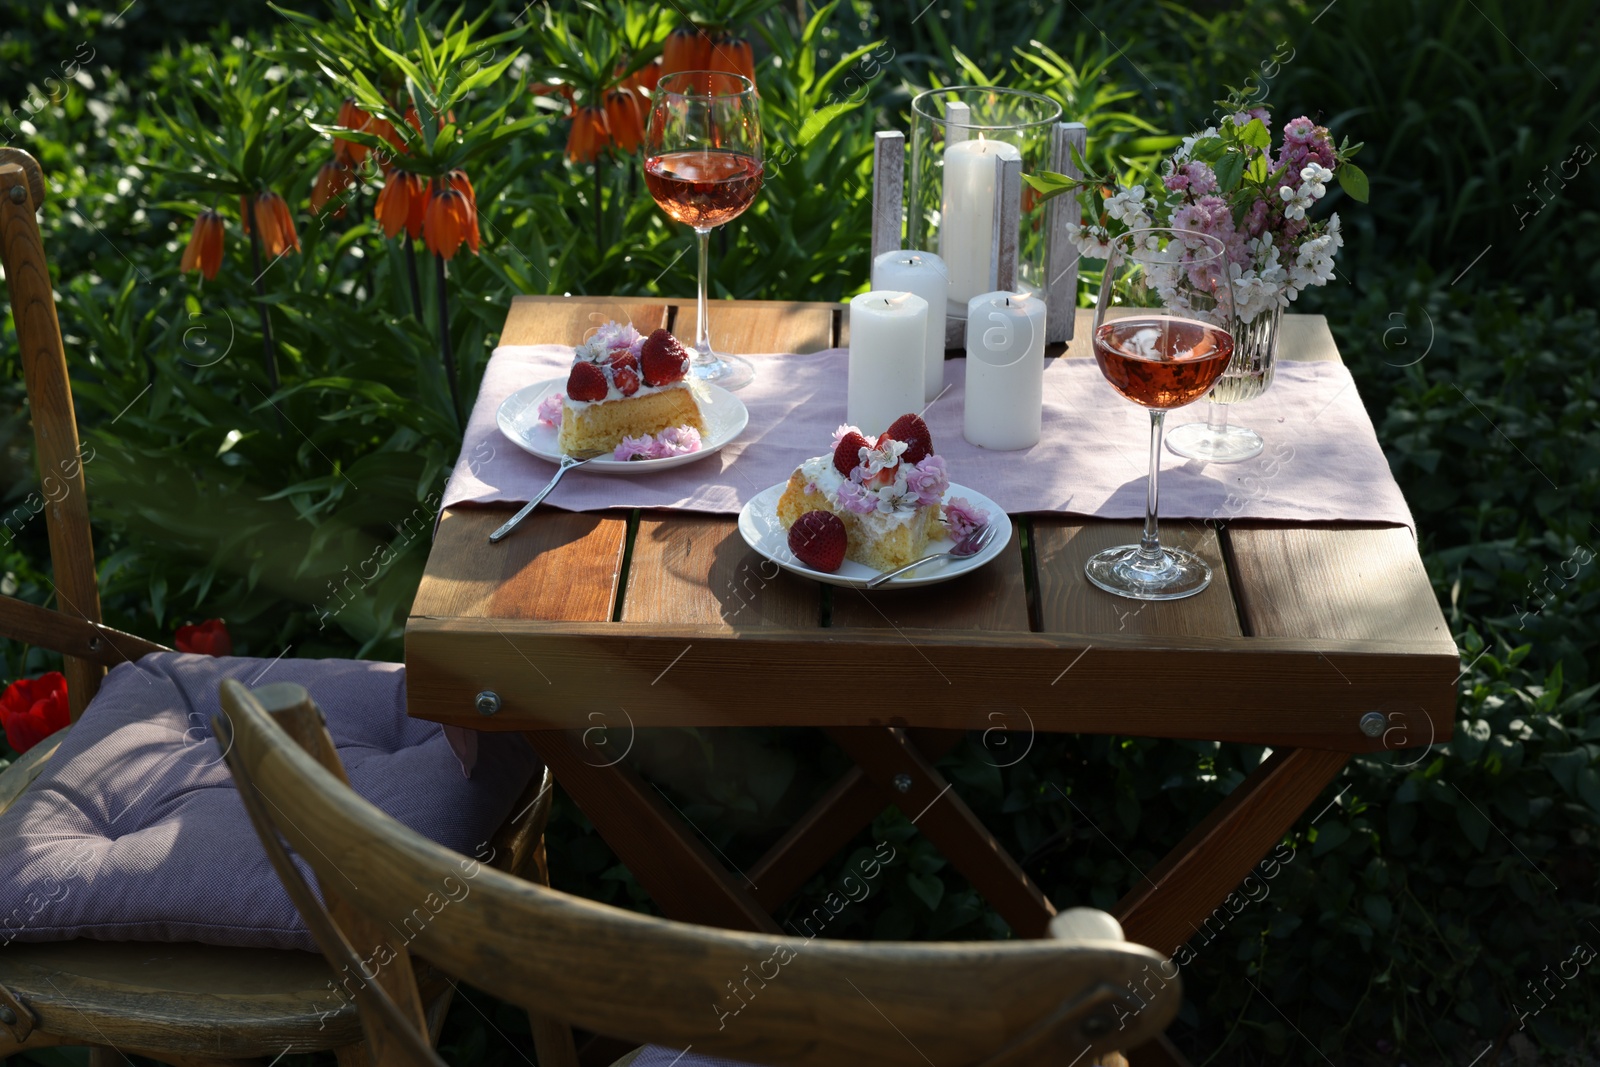 Photo of Vase with spring flowers, wine and cake on table served for romantic date in garden